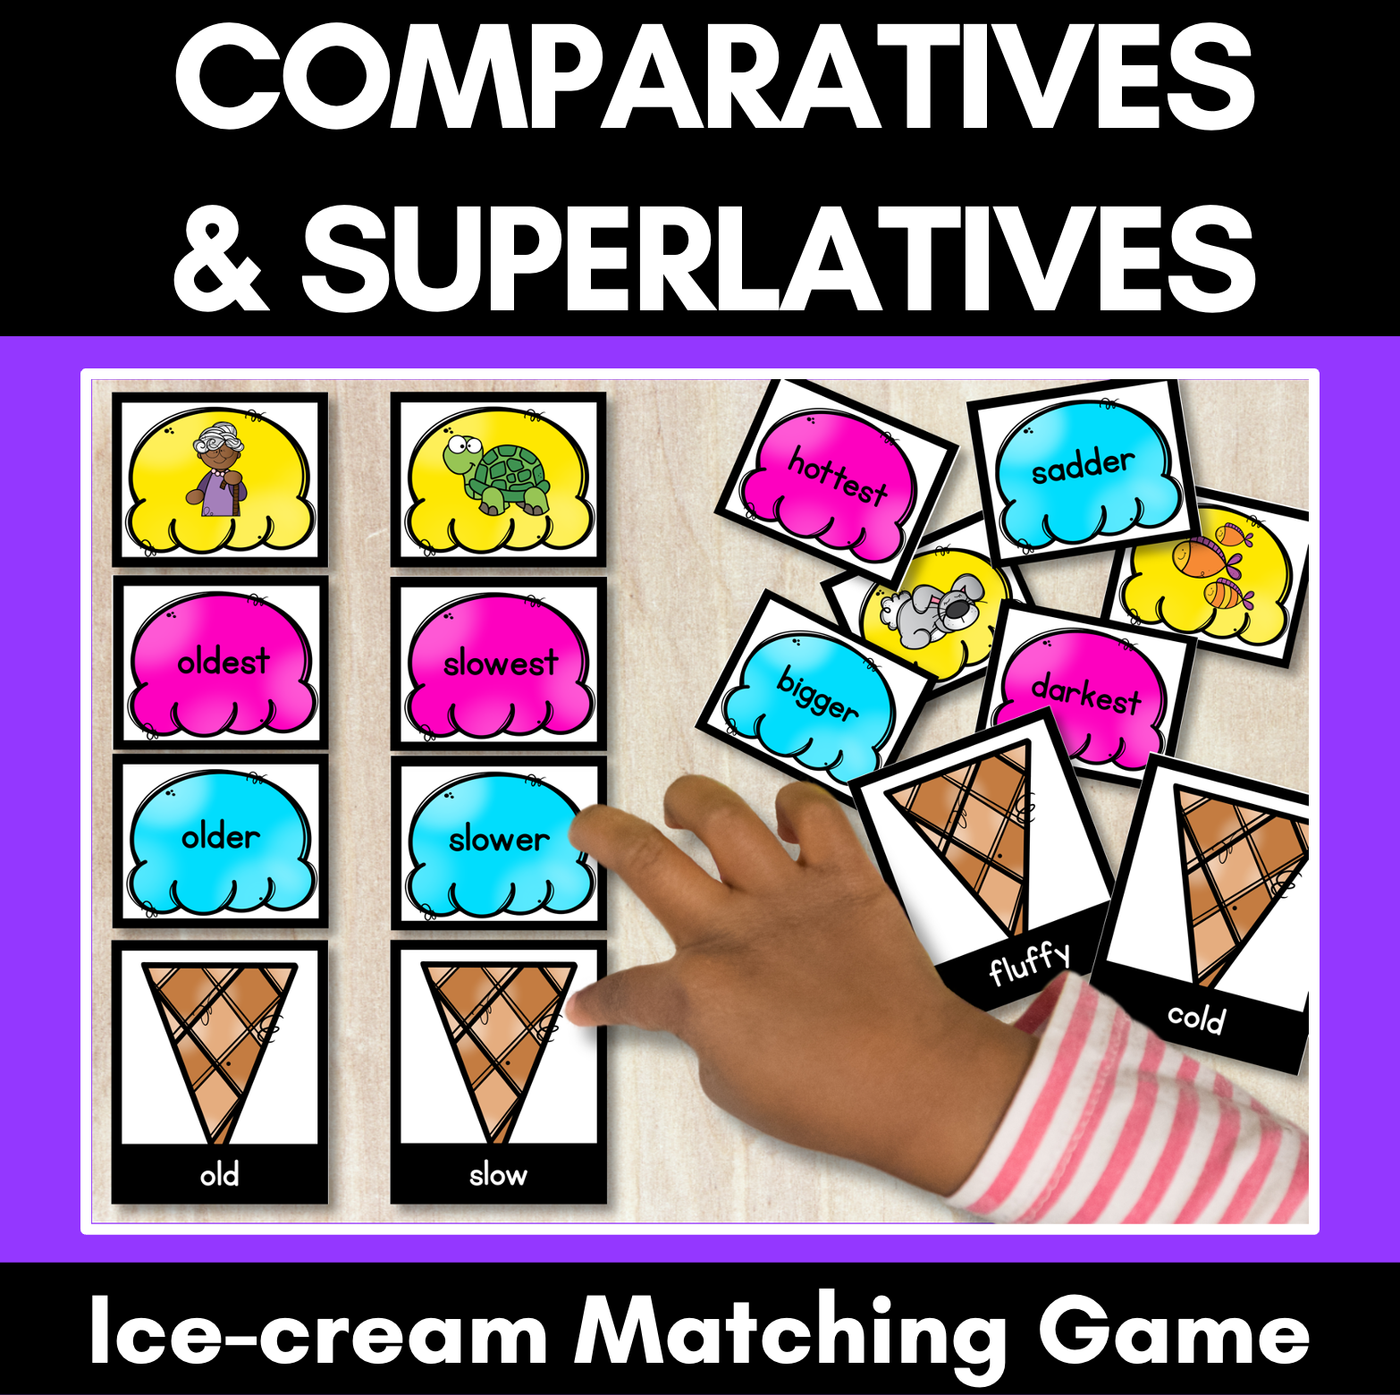 Superlative and Comparative Adjectives Matching Game